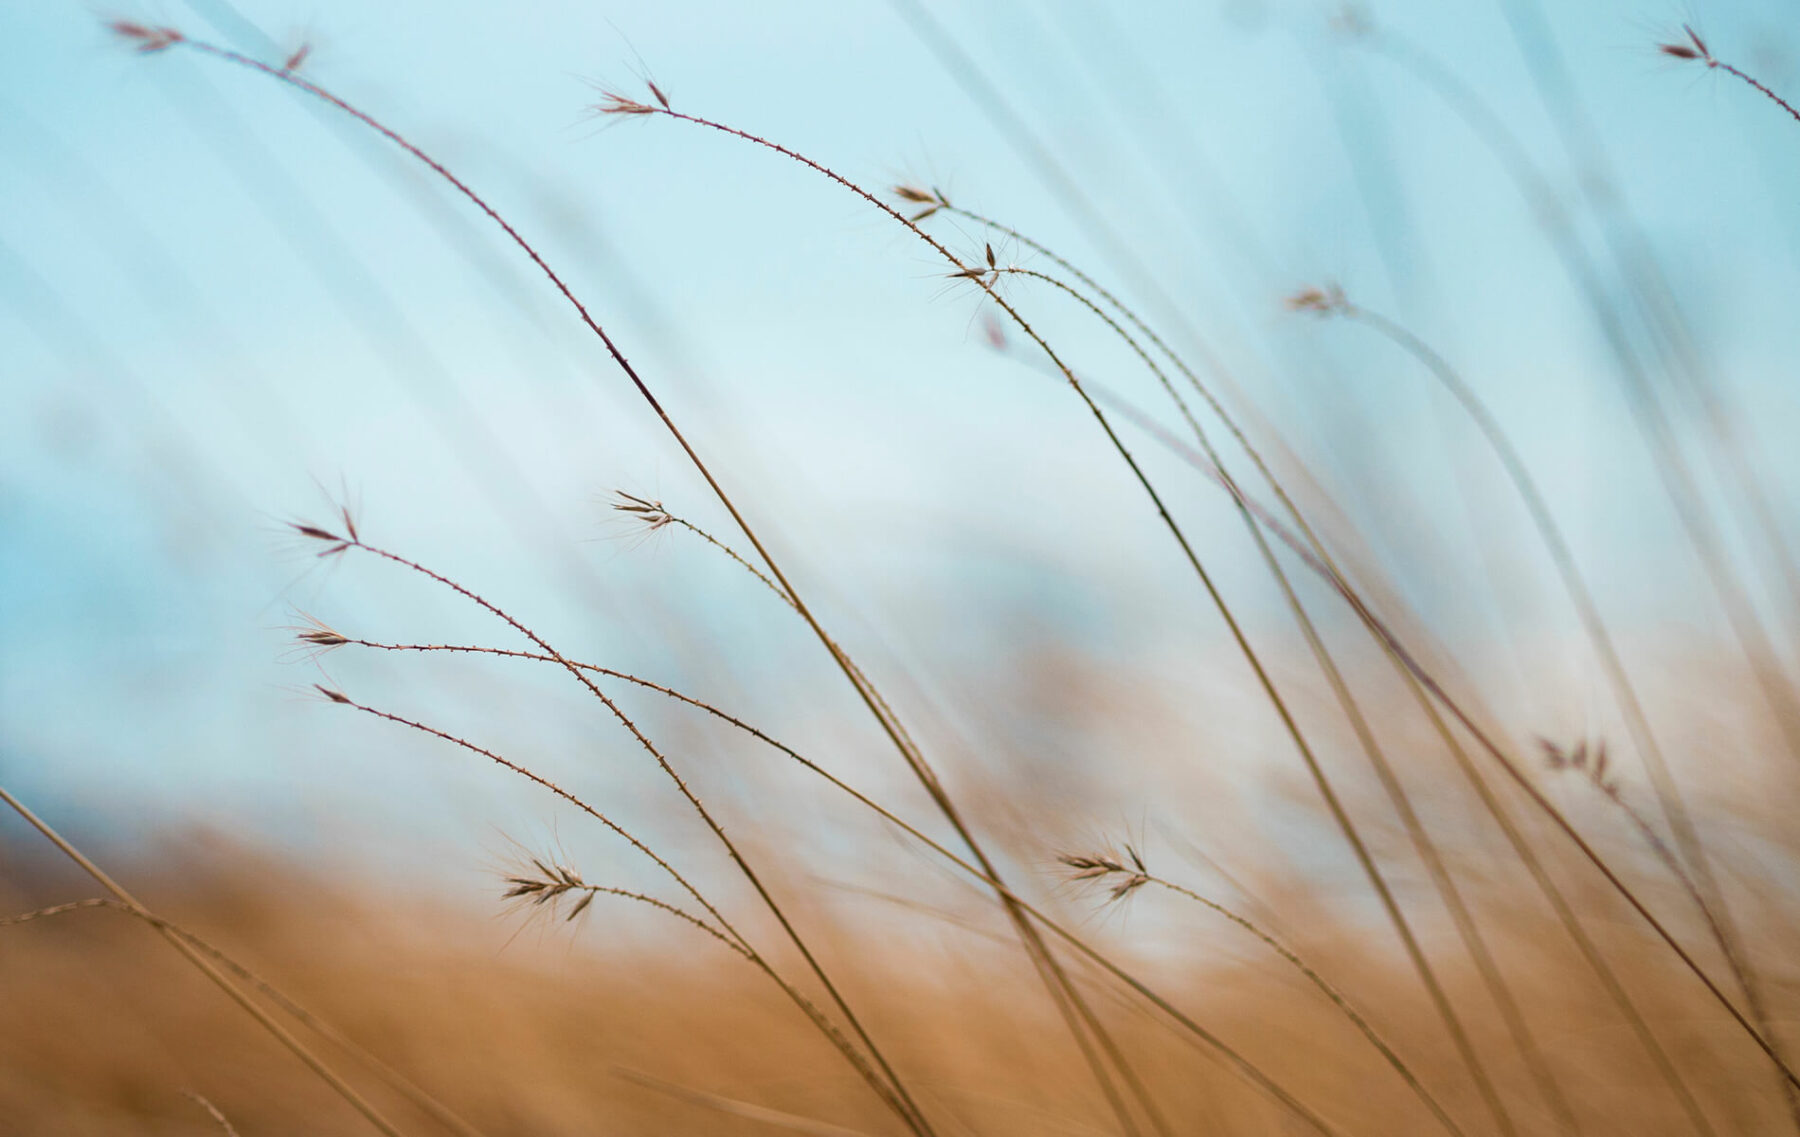 a close up of some tall grass with a blue sky in the background.